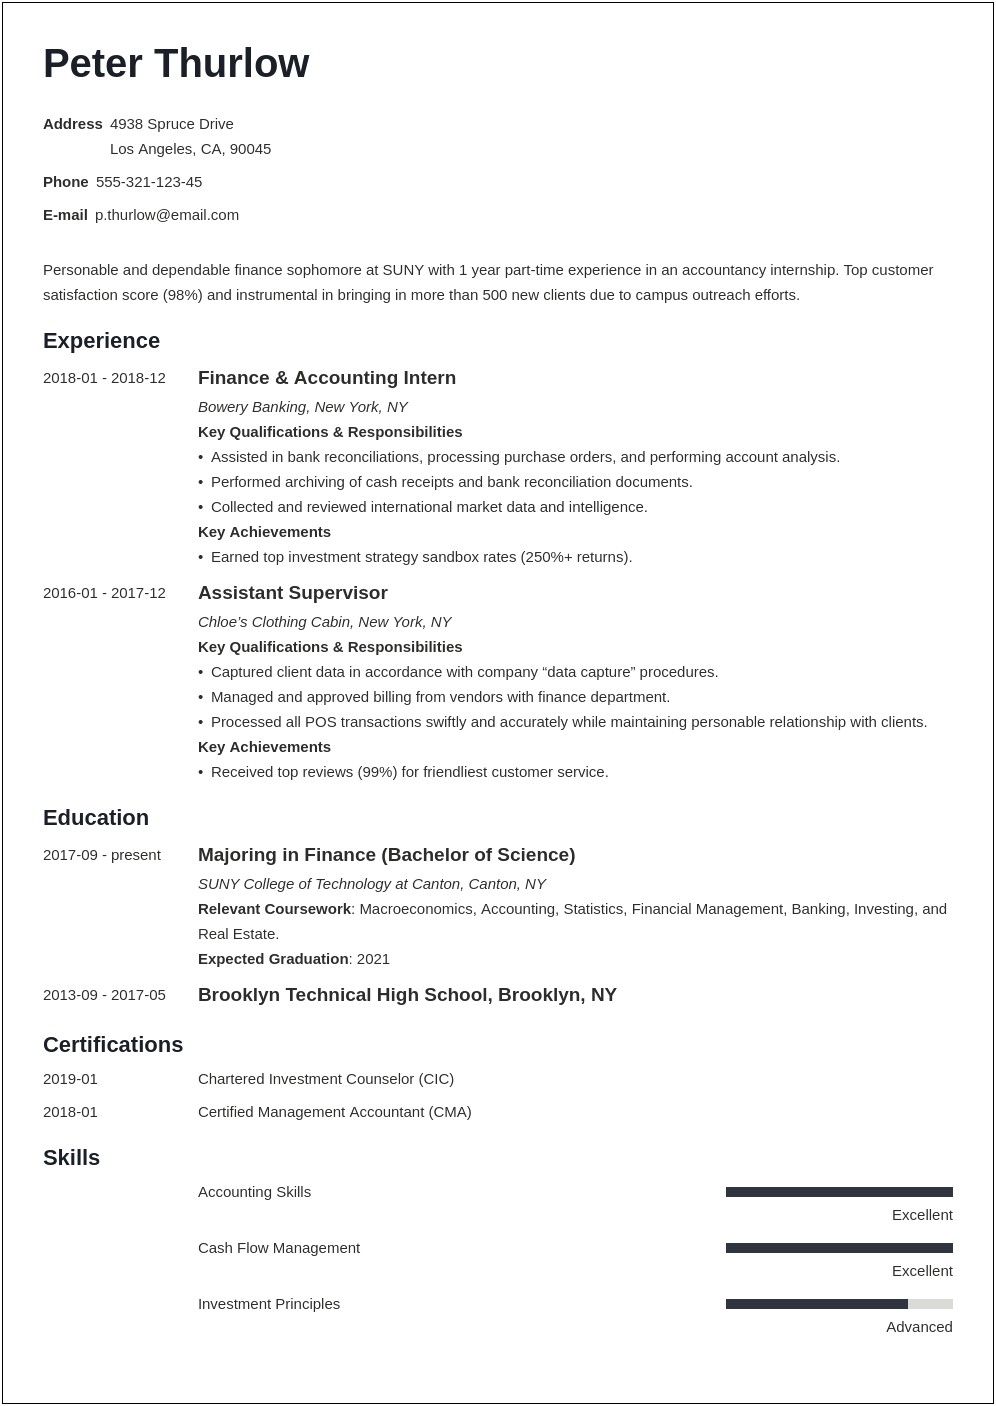 General Resume Objective For Internship Examples